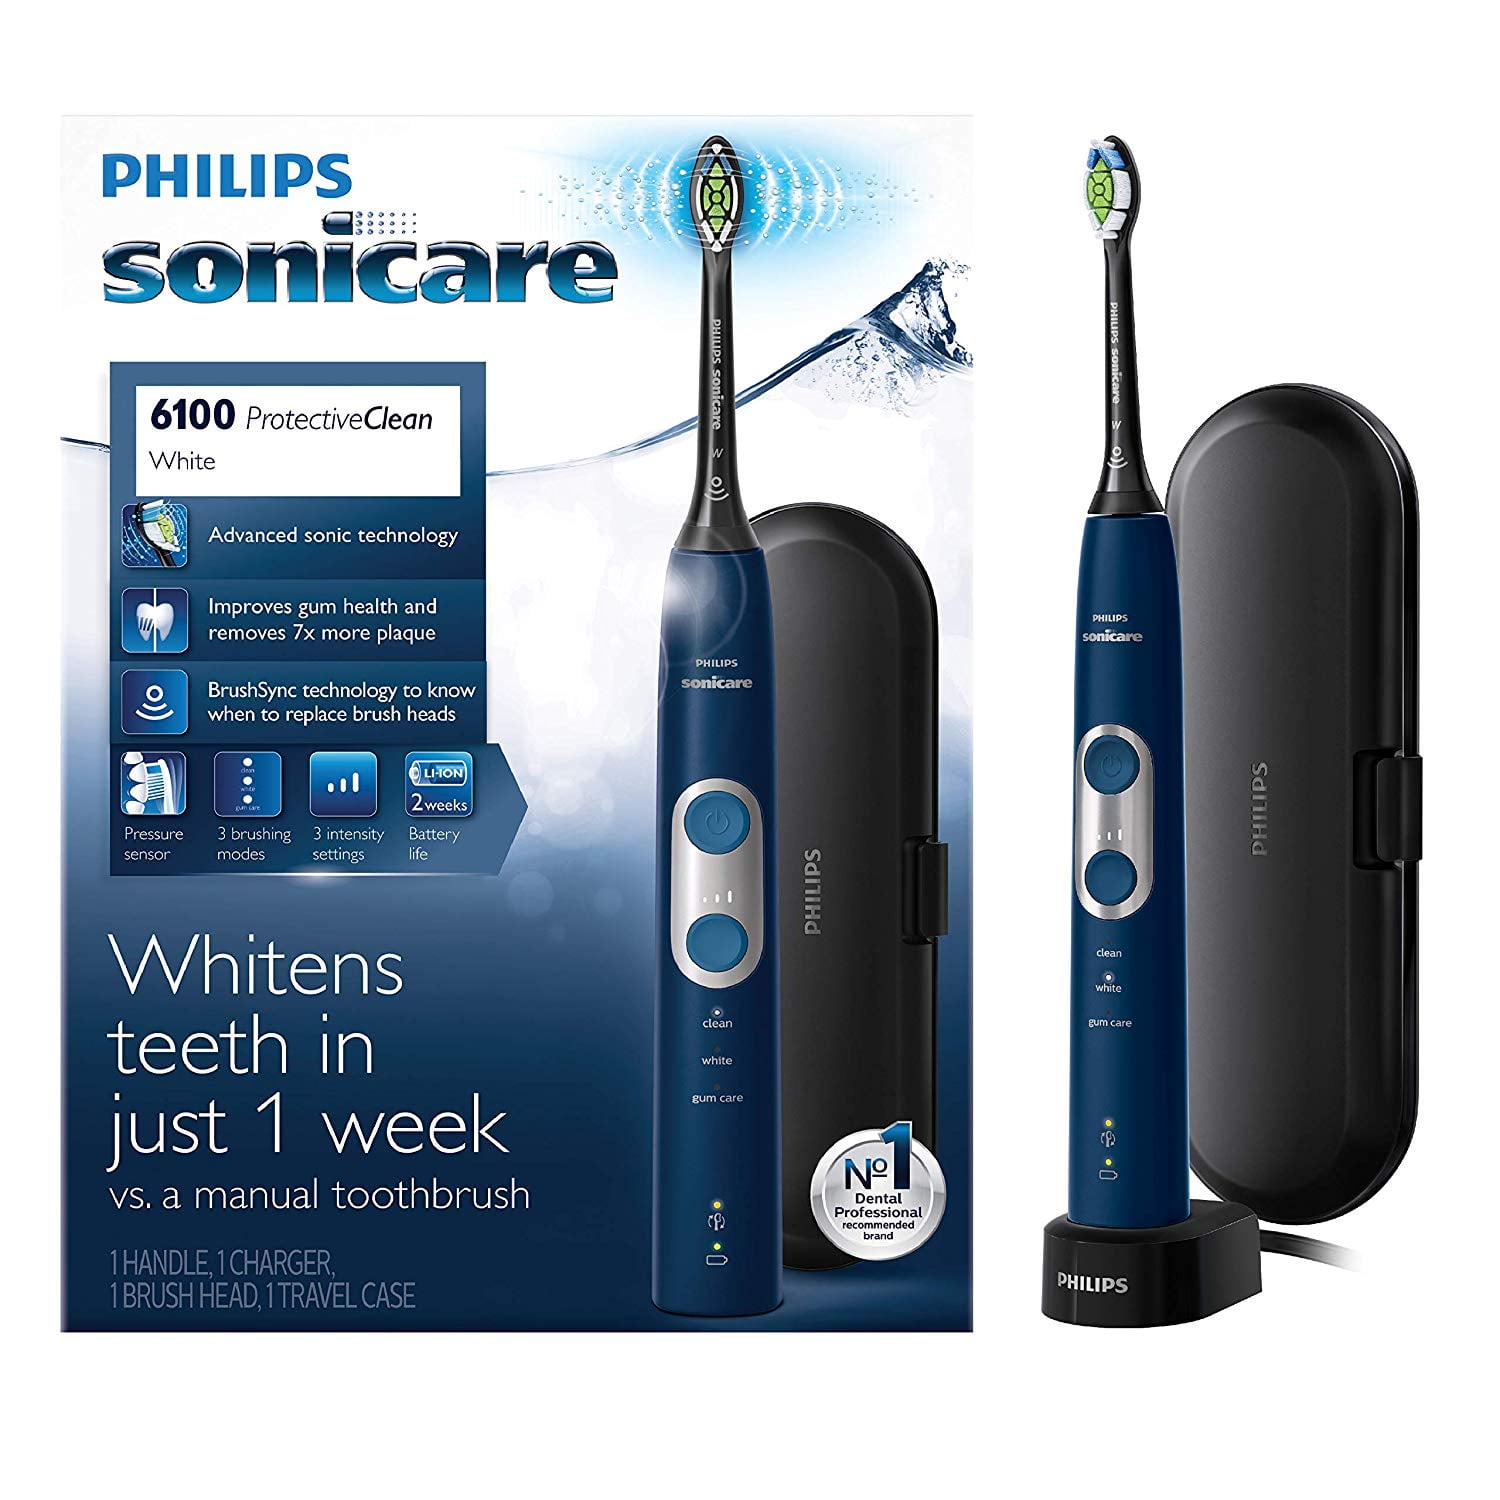 Philips Sonicare ProtectiveClean 6100 Rechargeable Electric Toothbrush 